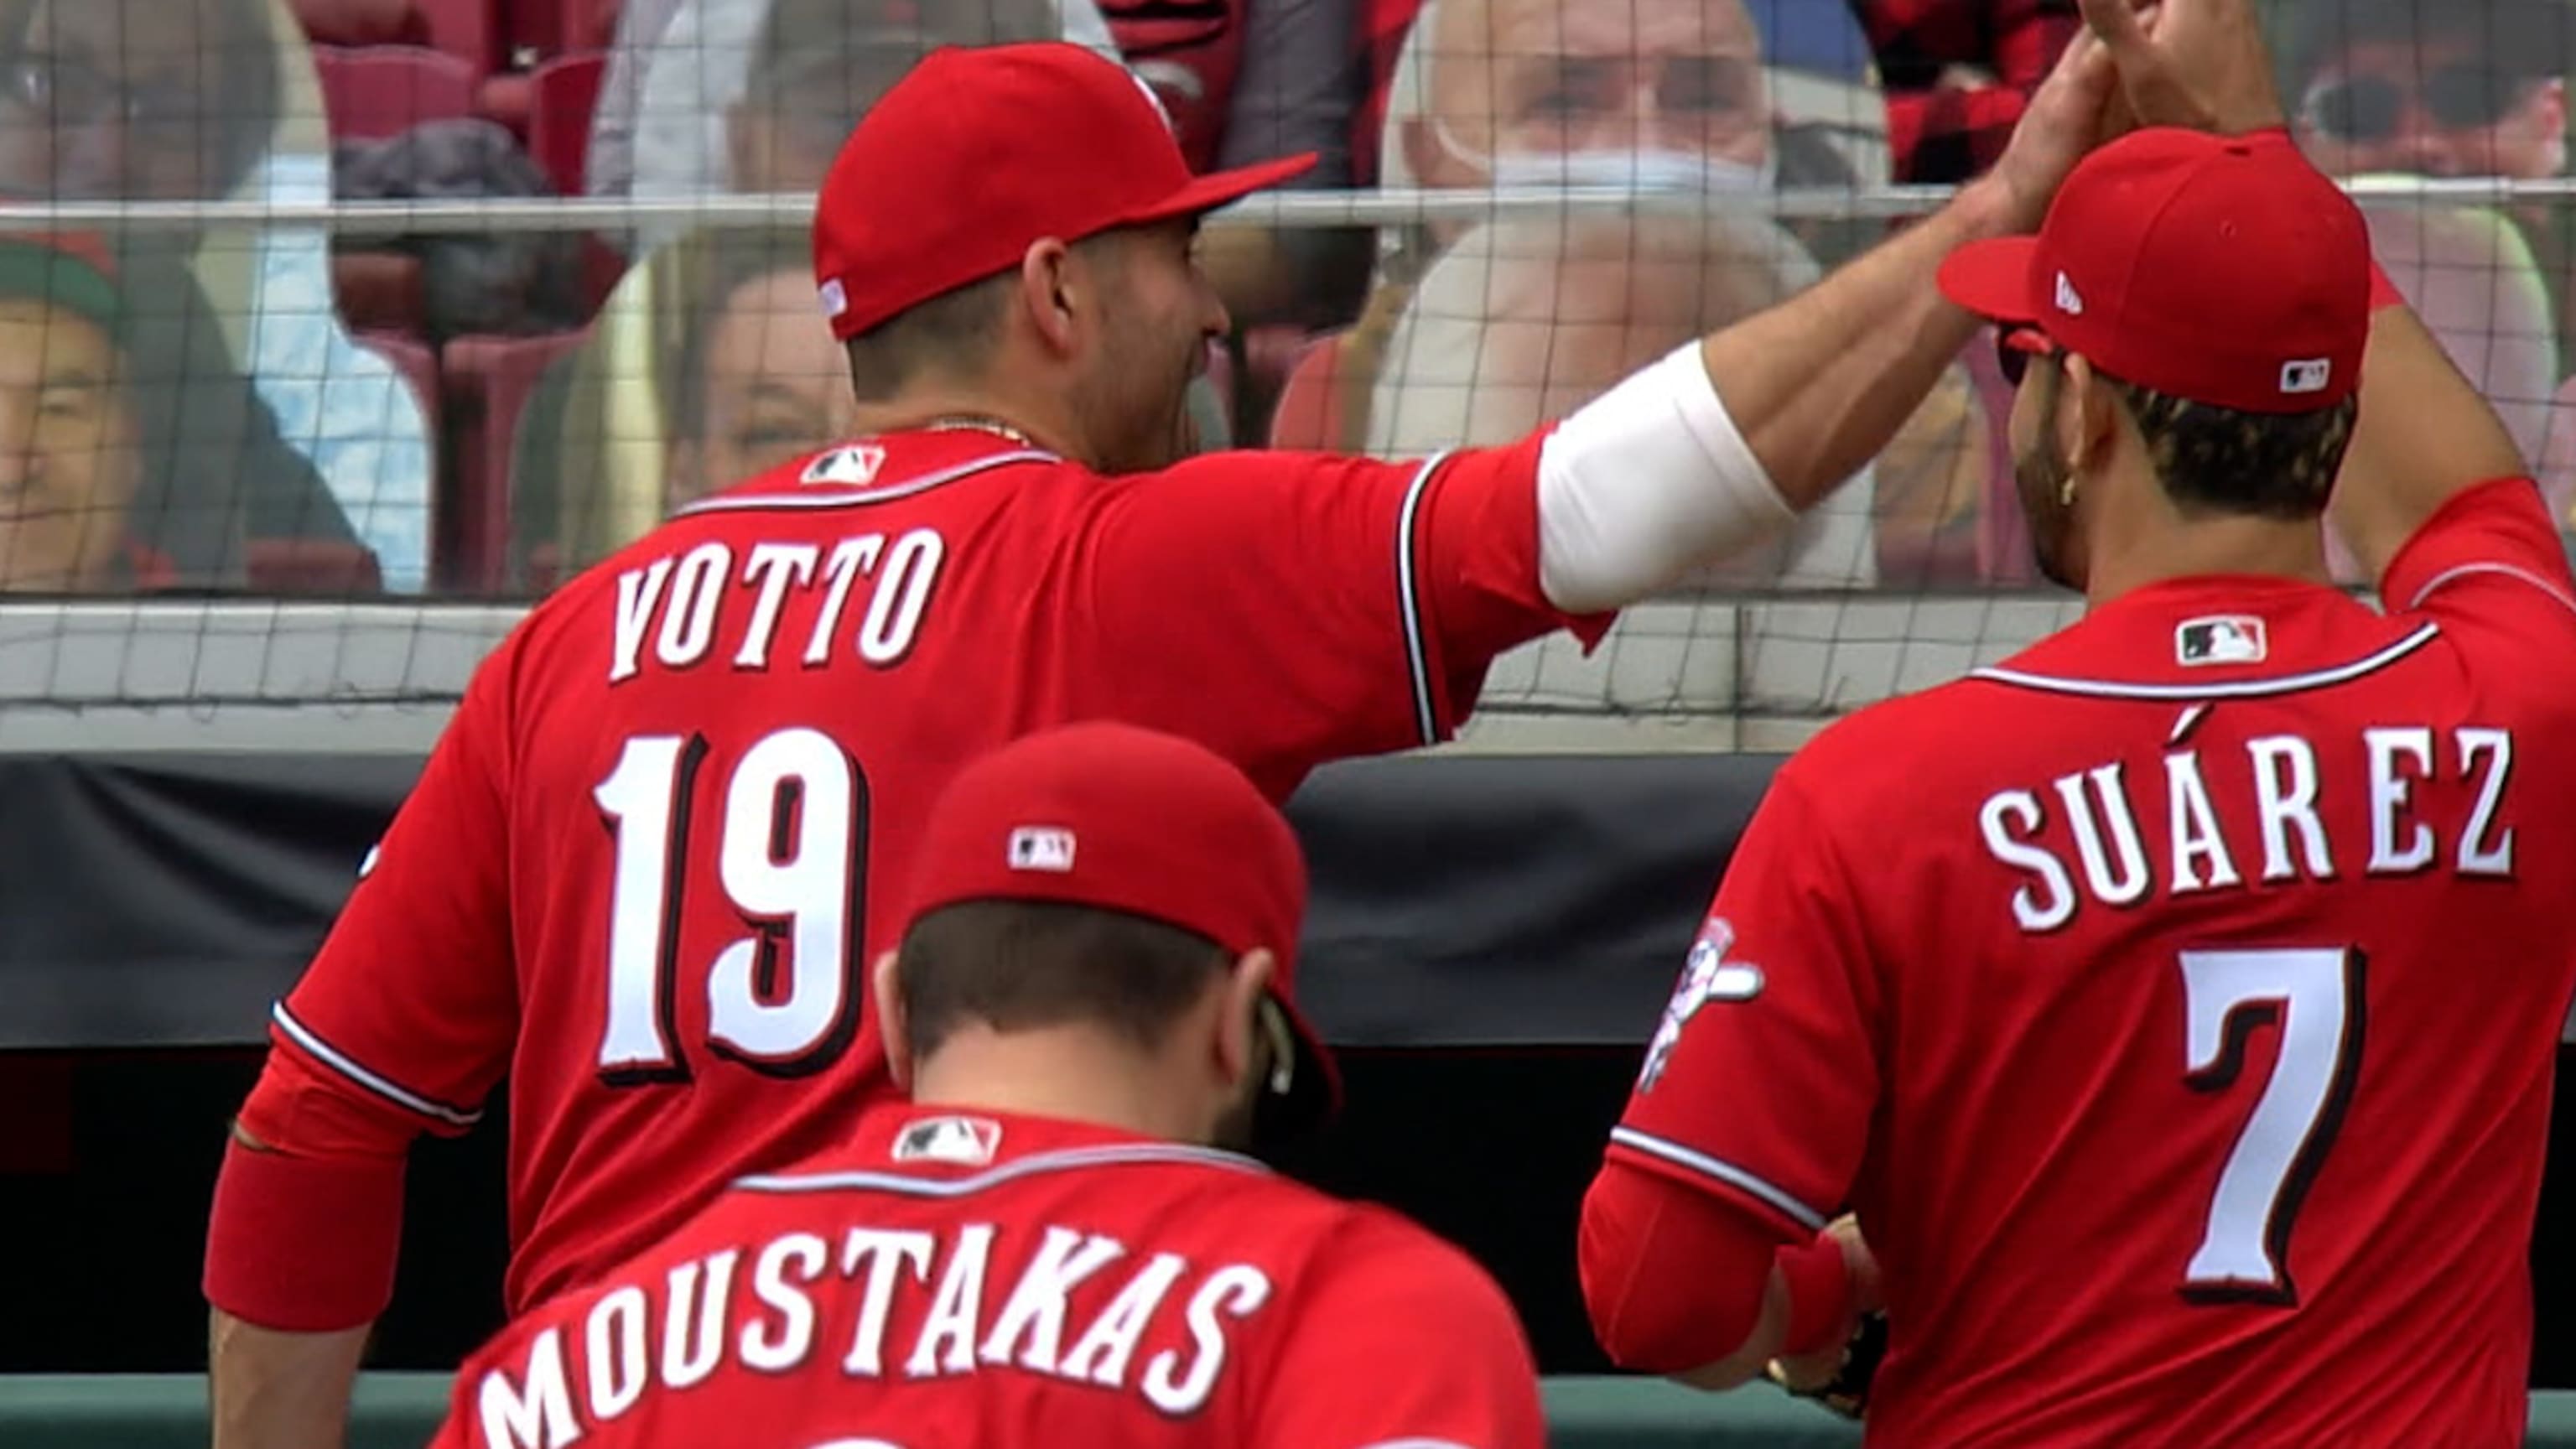 Joey Votto on X: I have a confession, I may have stayed up late a few too  many nights online shopping at the team store. I've got A LOT of extra VOTTO